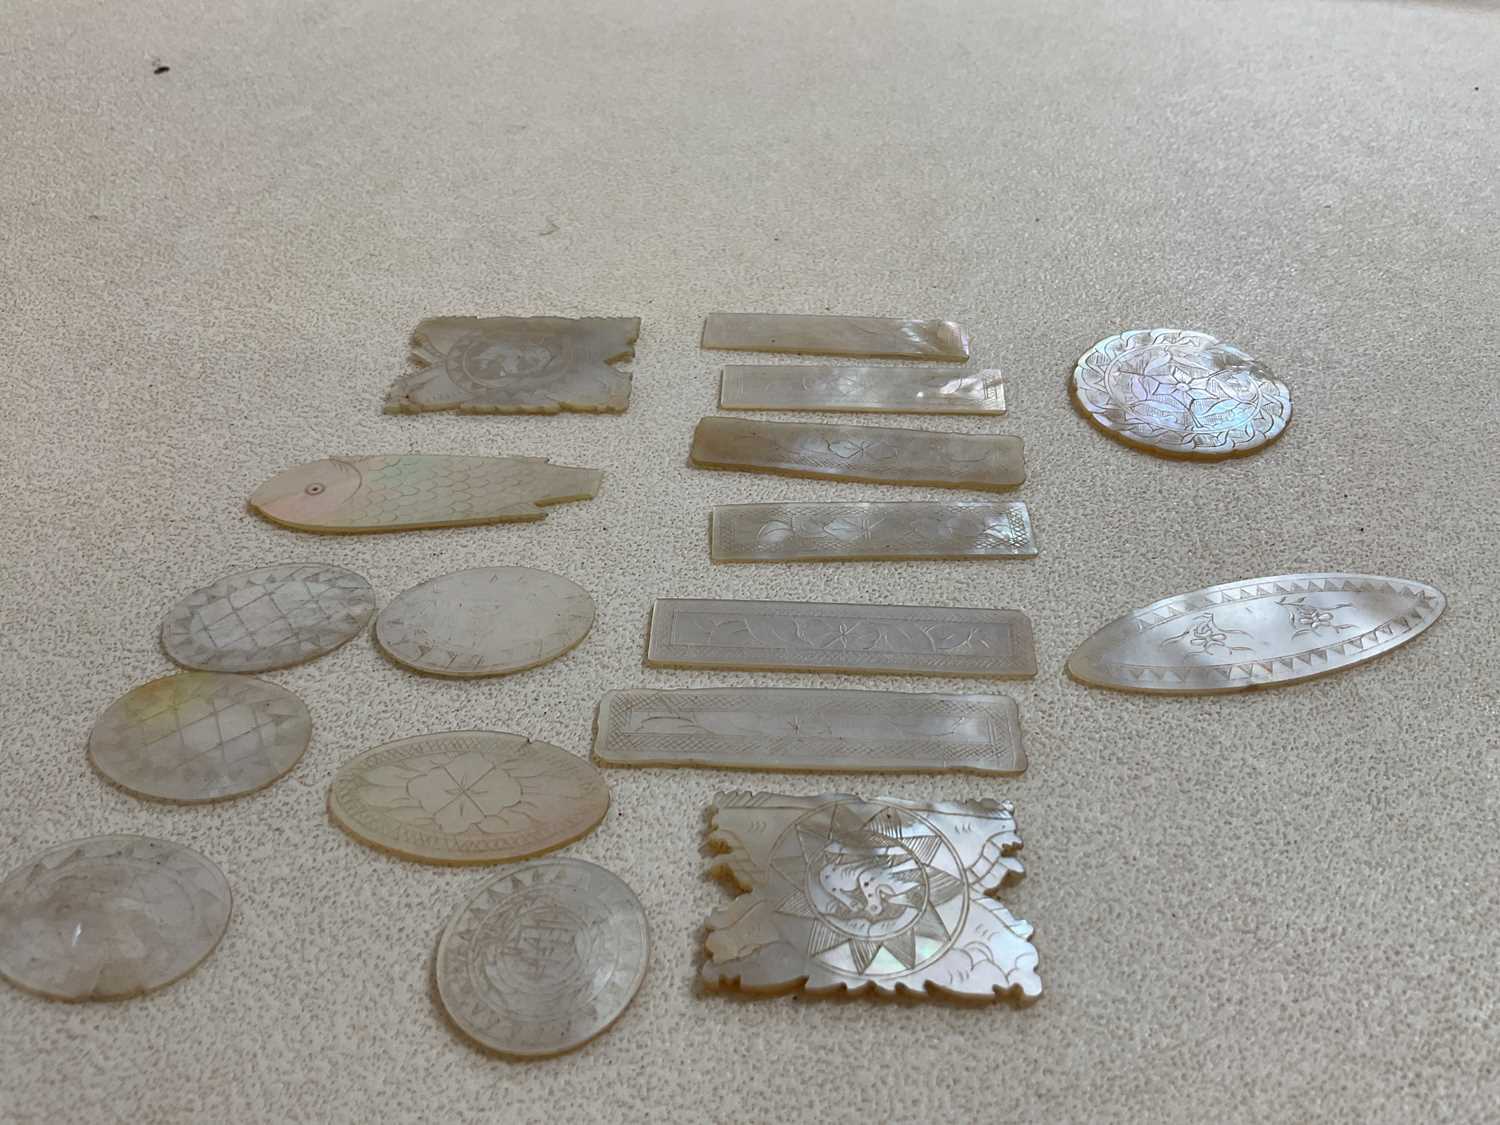 A small collection of 19th century Chinese mother of pearl gaming counters.